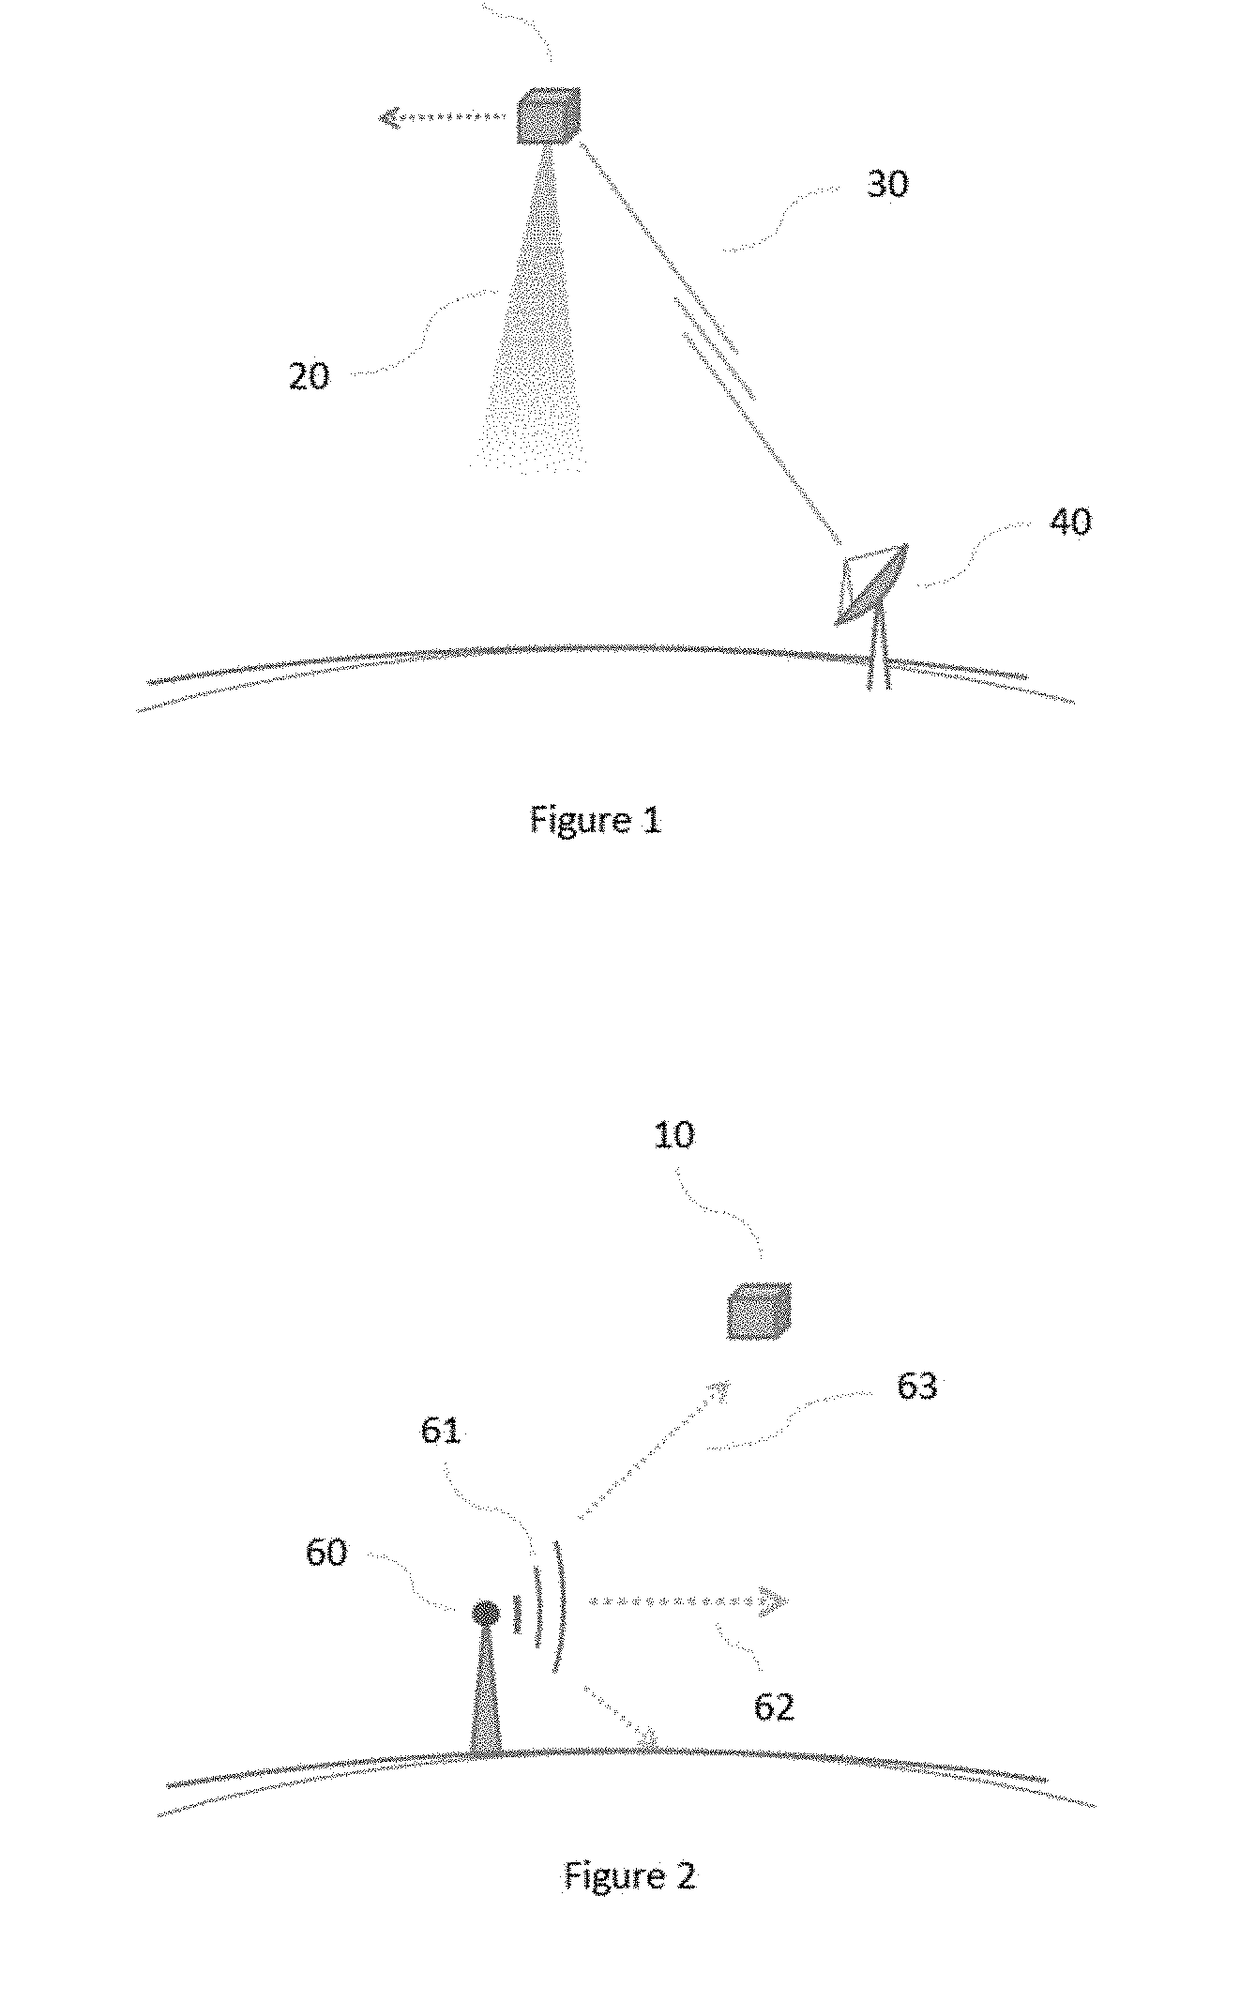 Systems and methods for measuring terrestrial spectrum from space